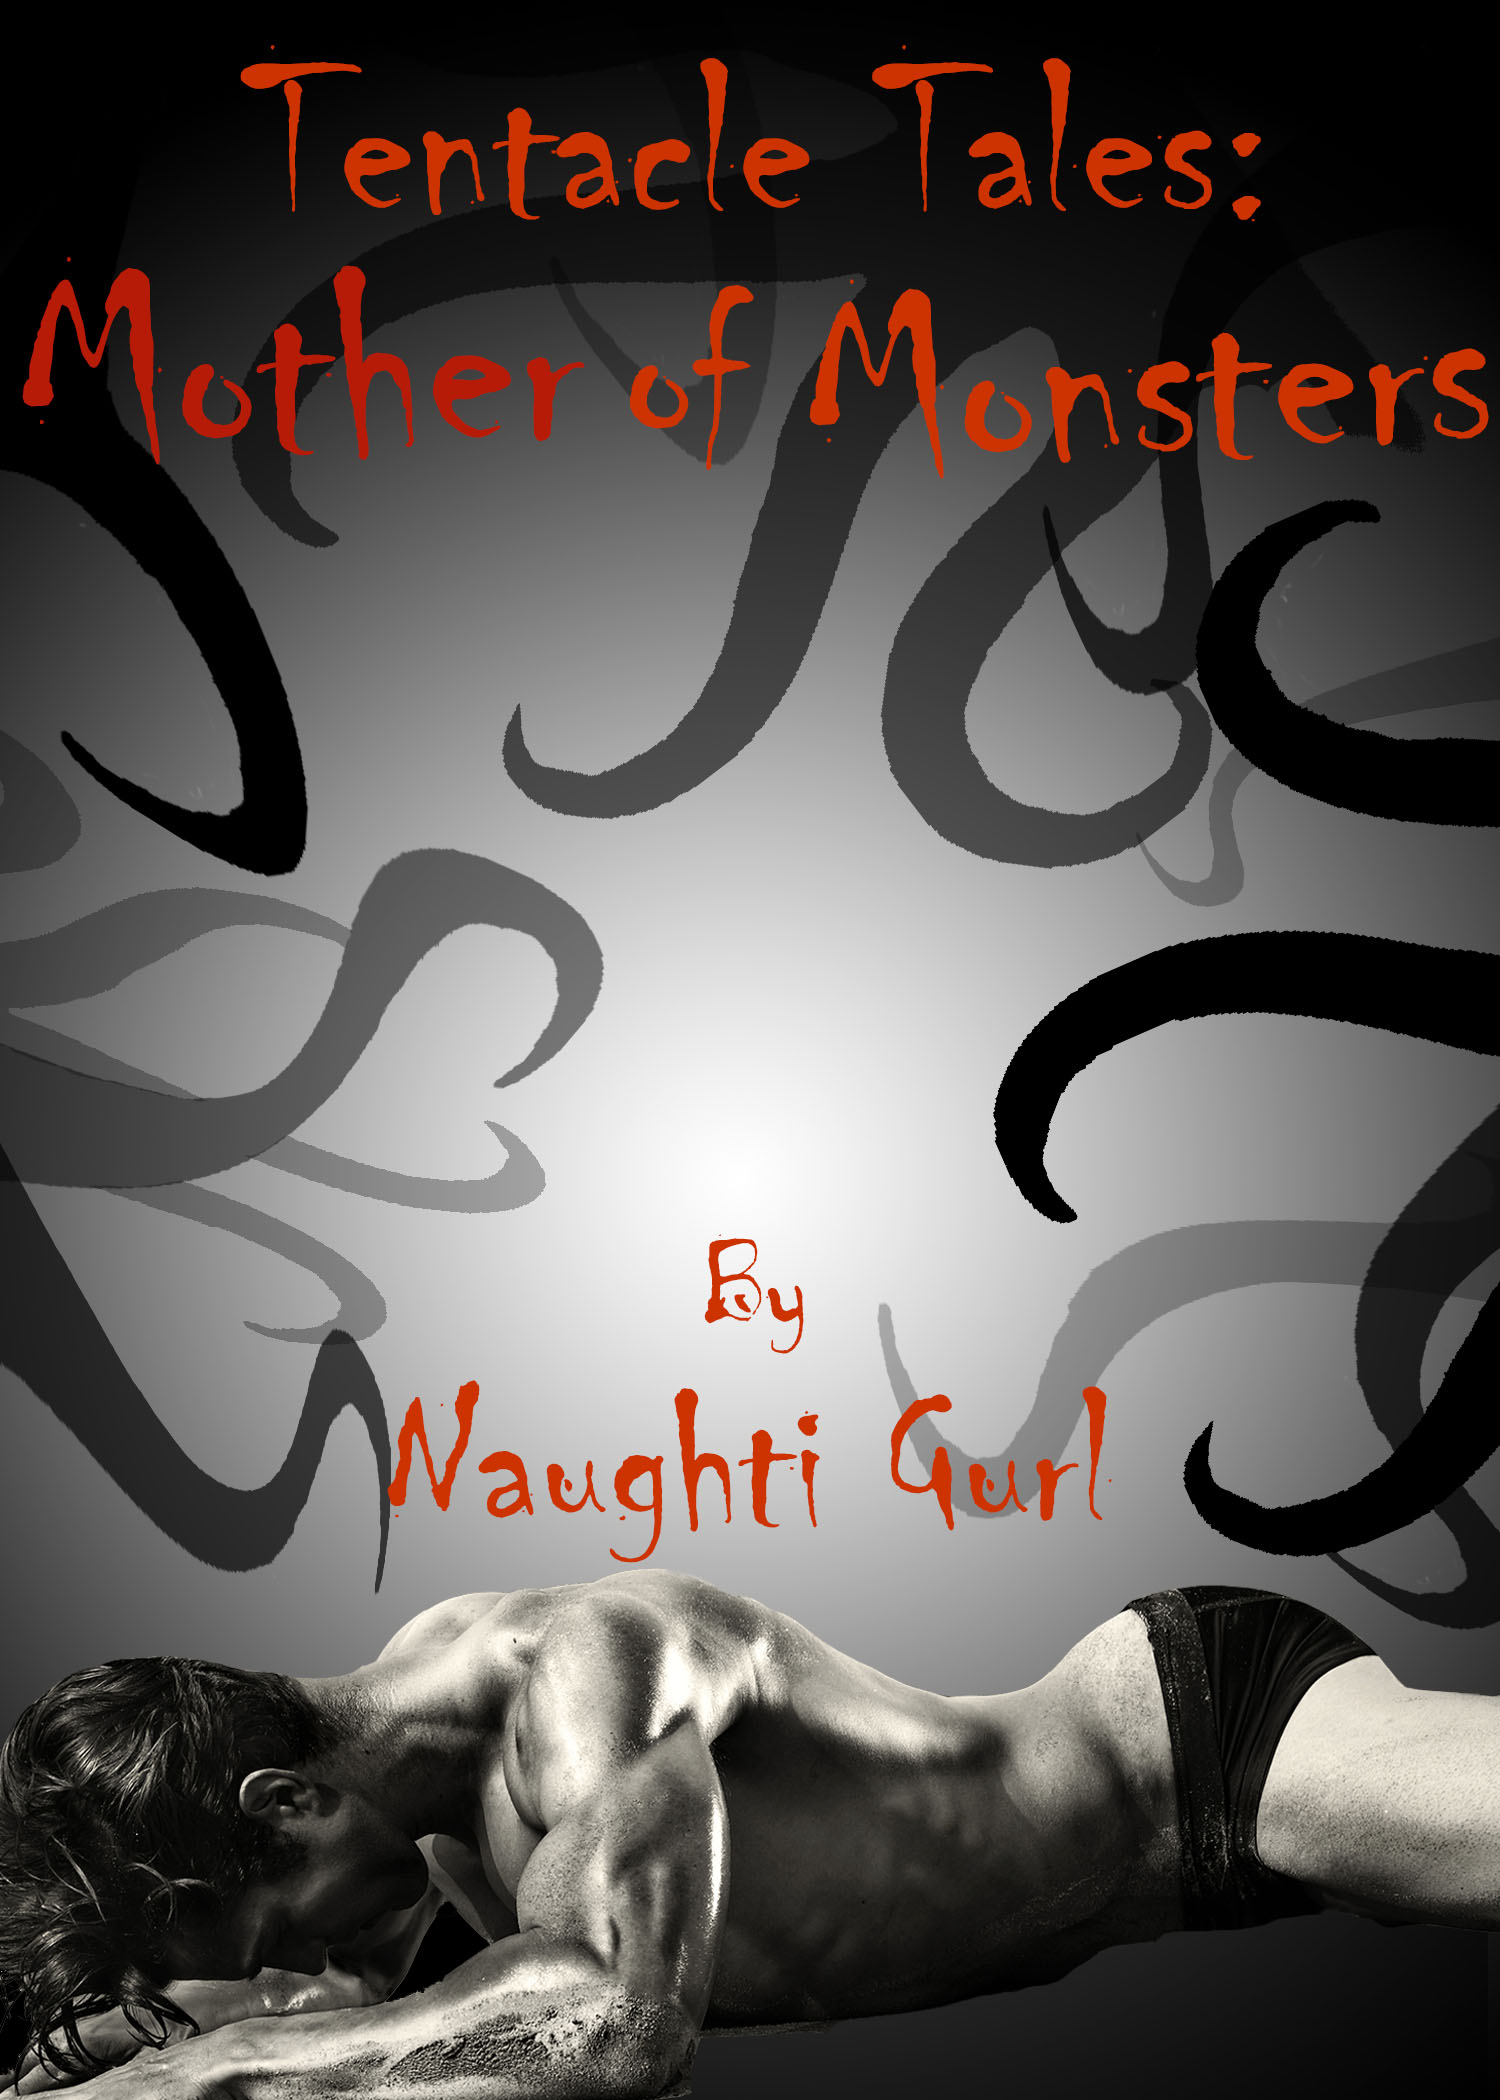 Bloody Tentacle Porn - Smashwords â€“ Mother of Monsters â€“ a book by Naughti Gurl